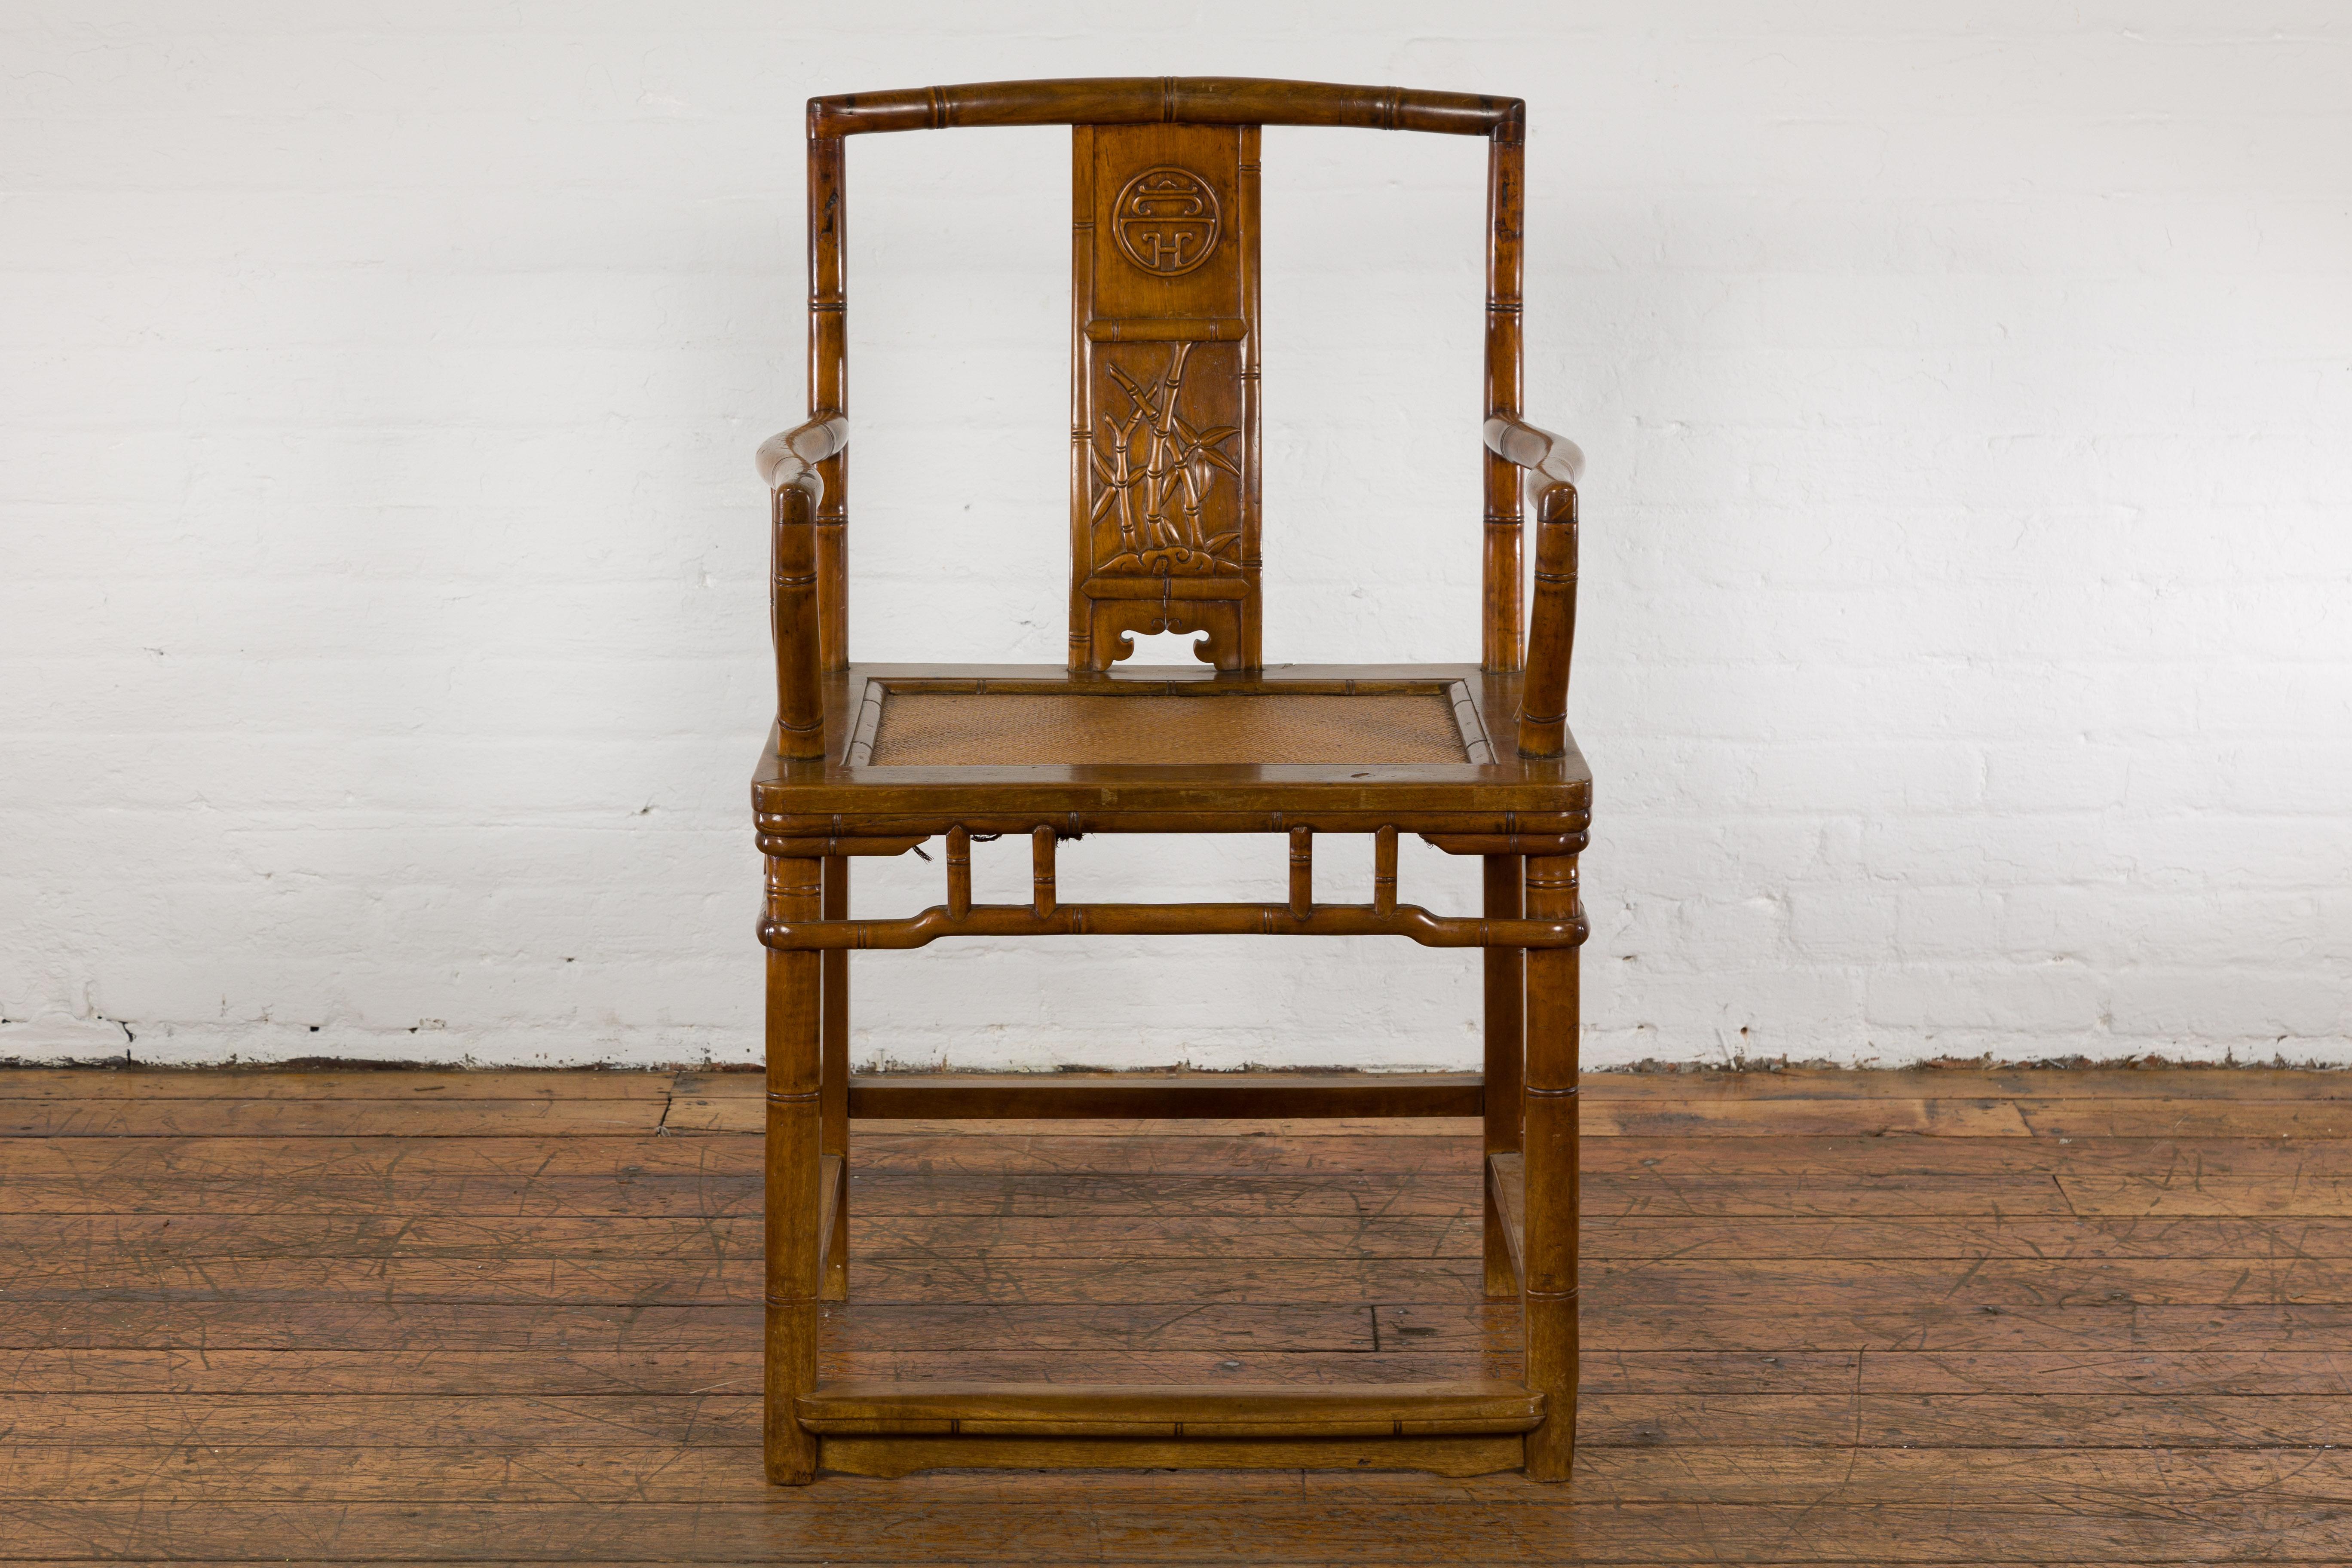 A Chinese late Qing Dynasty period wooden armchair from the early 20th century, with carved splat, sinuous arms, rattan seat and pierced pillar strut decorated apron. This antique piece showcases a beautiful fusion of form and function, making it an